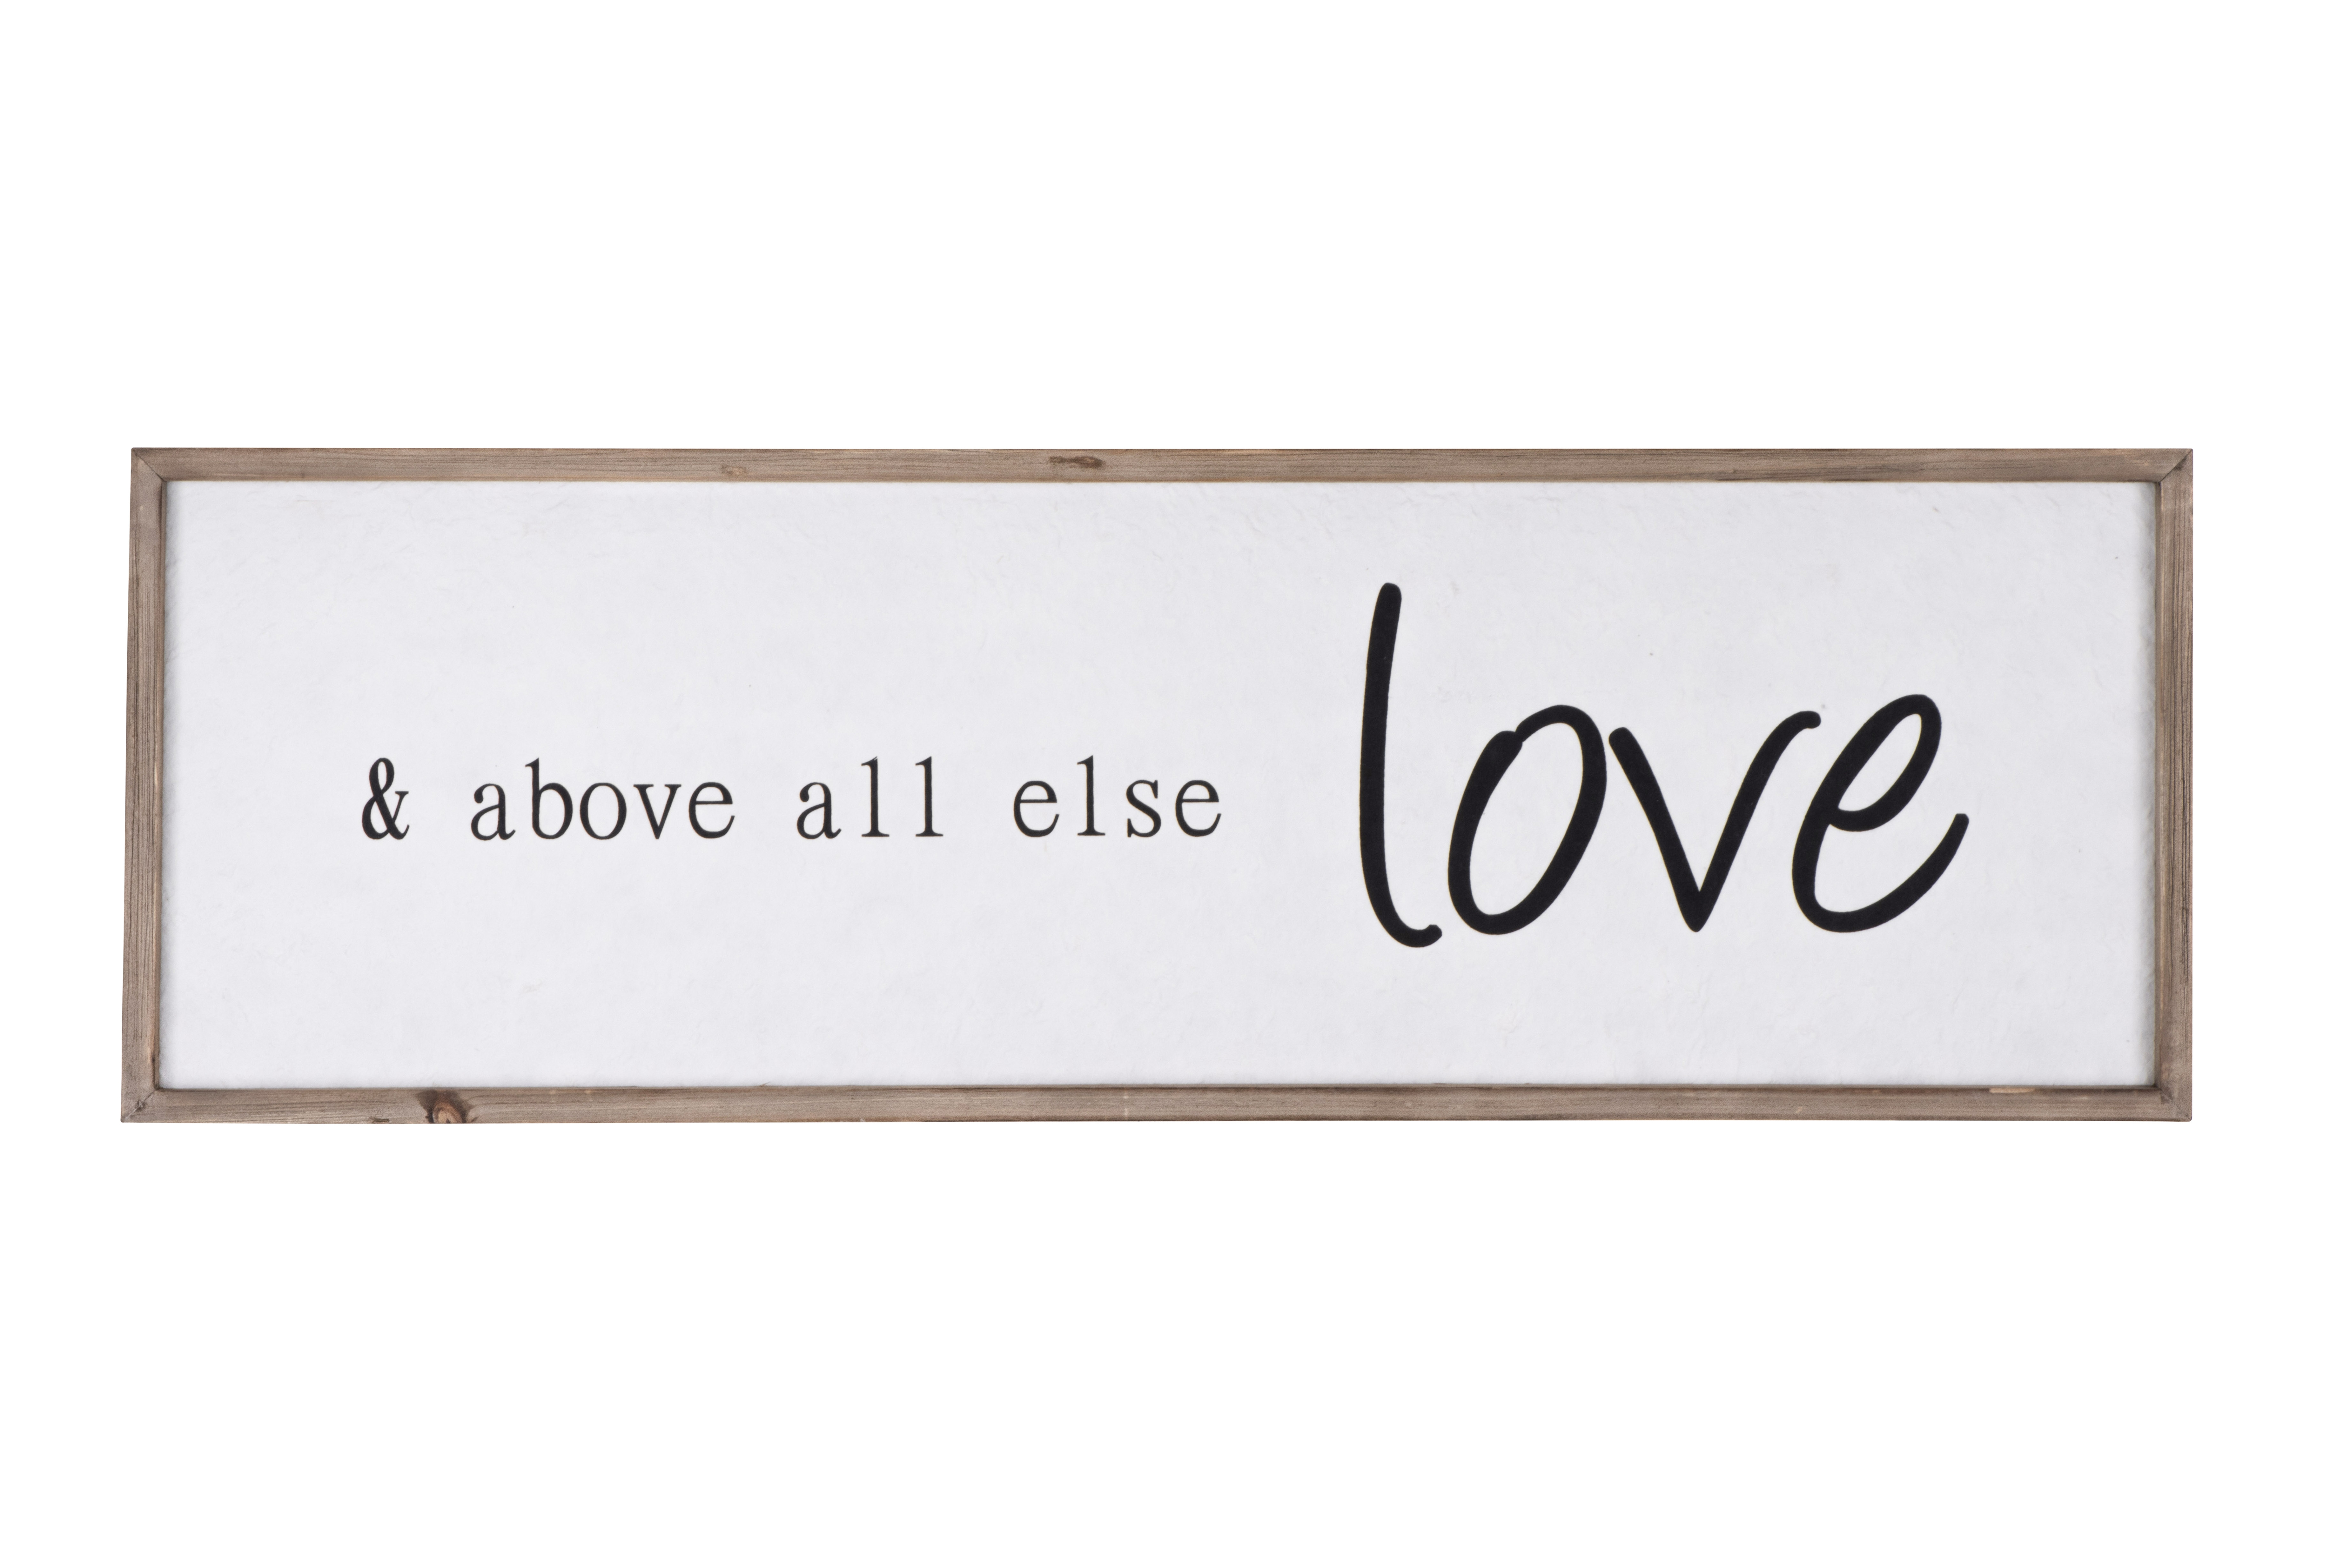 "& above all else love" Wood Framed Wall Décor - Nomad Home